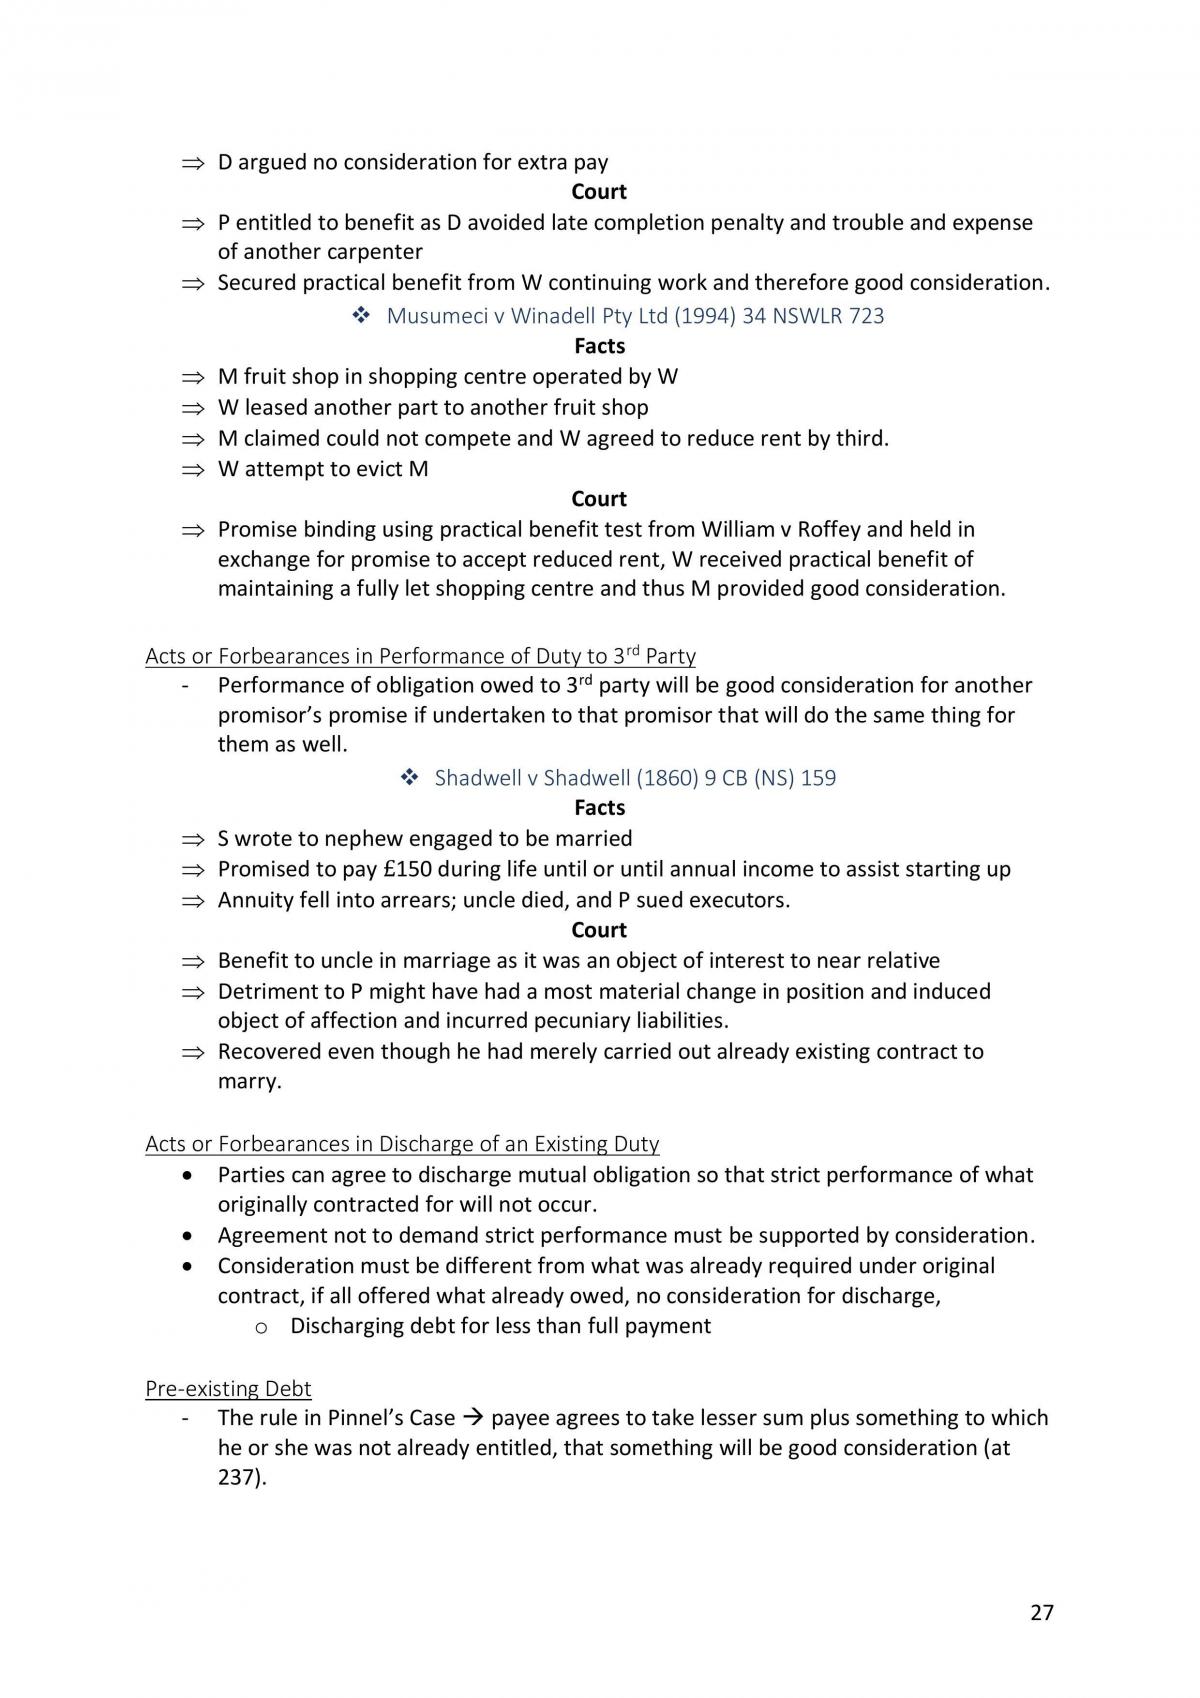 Exam Notes - Contract Law - Page 27